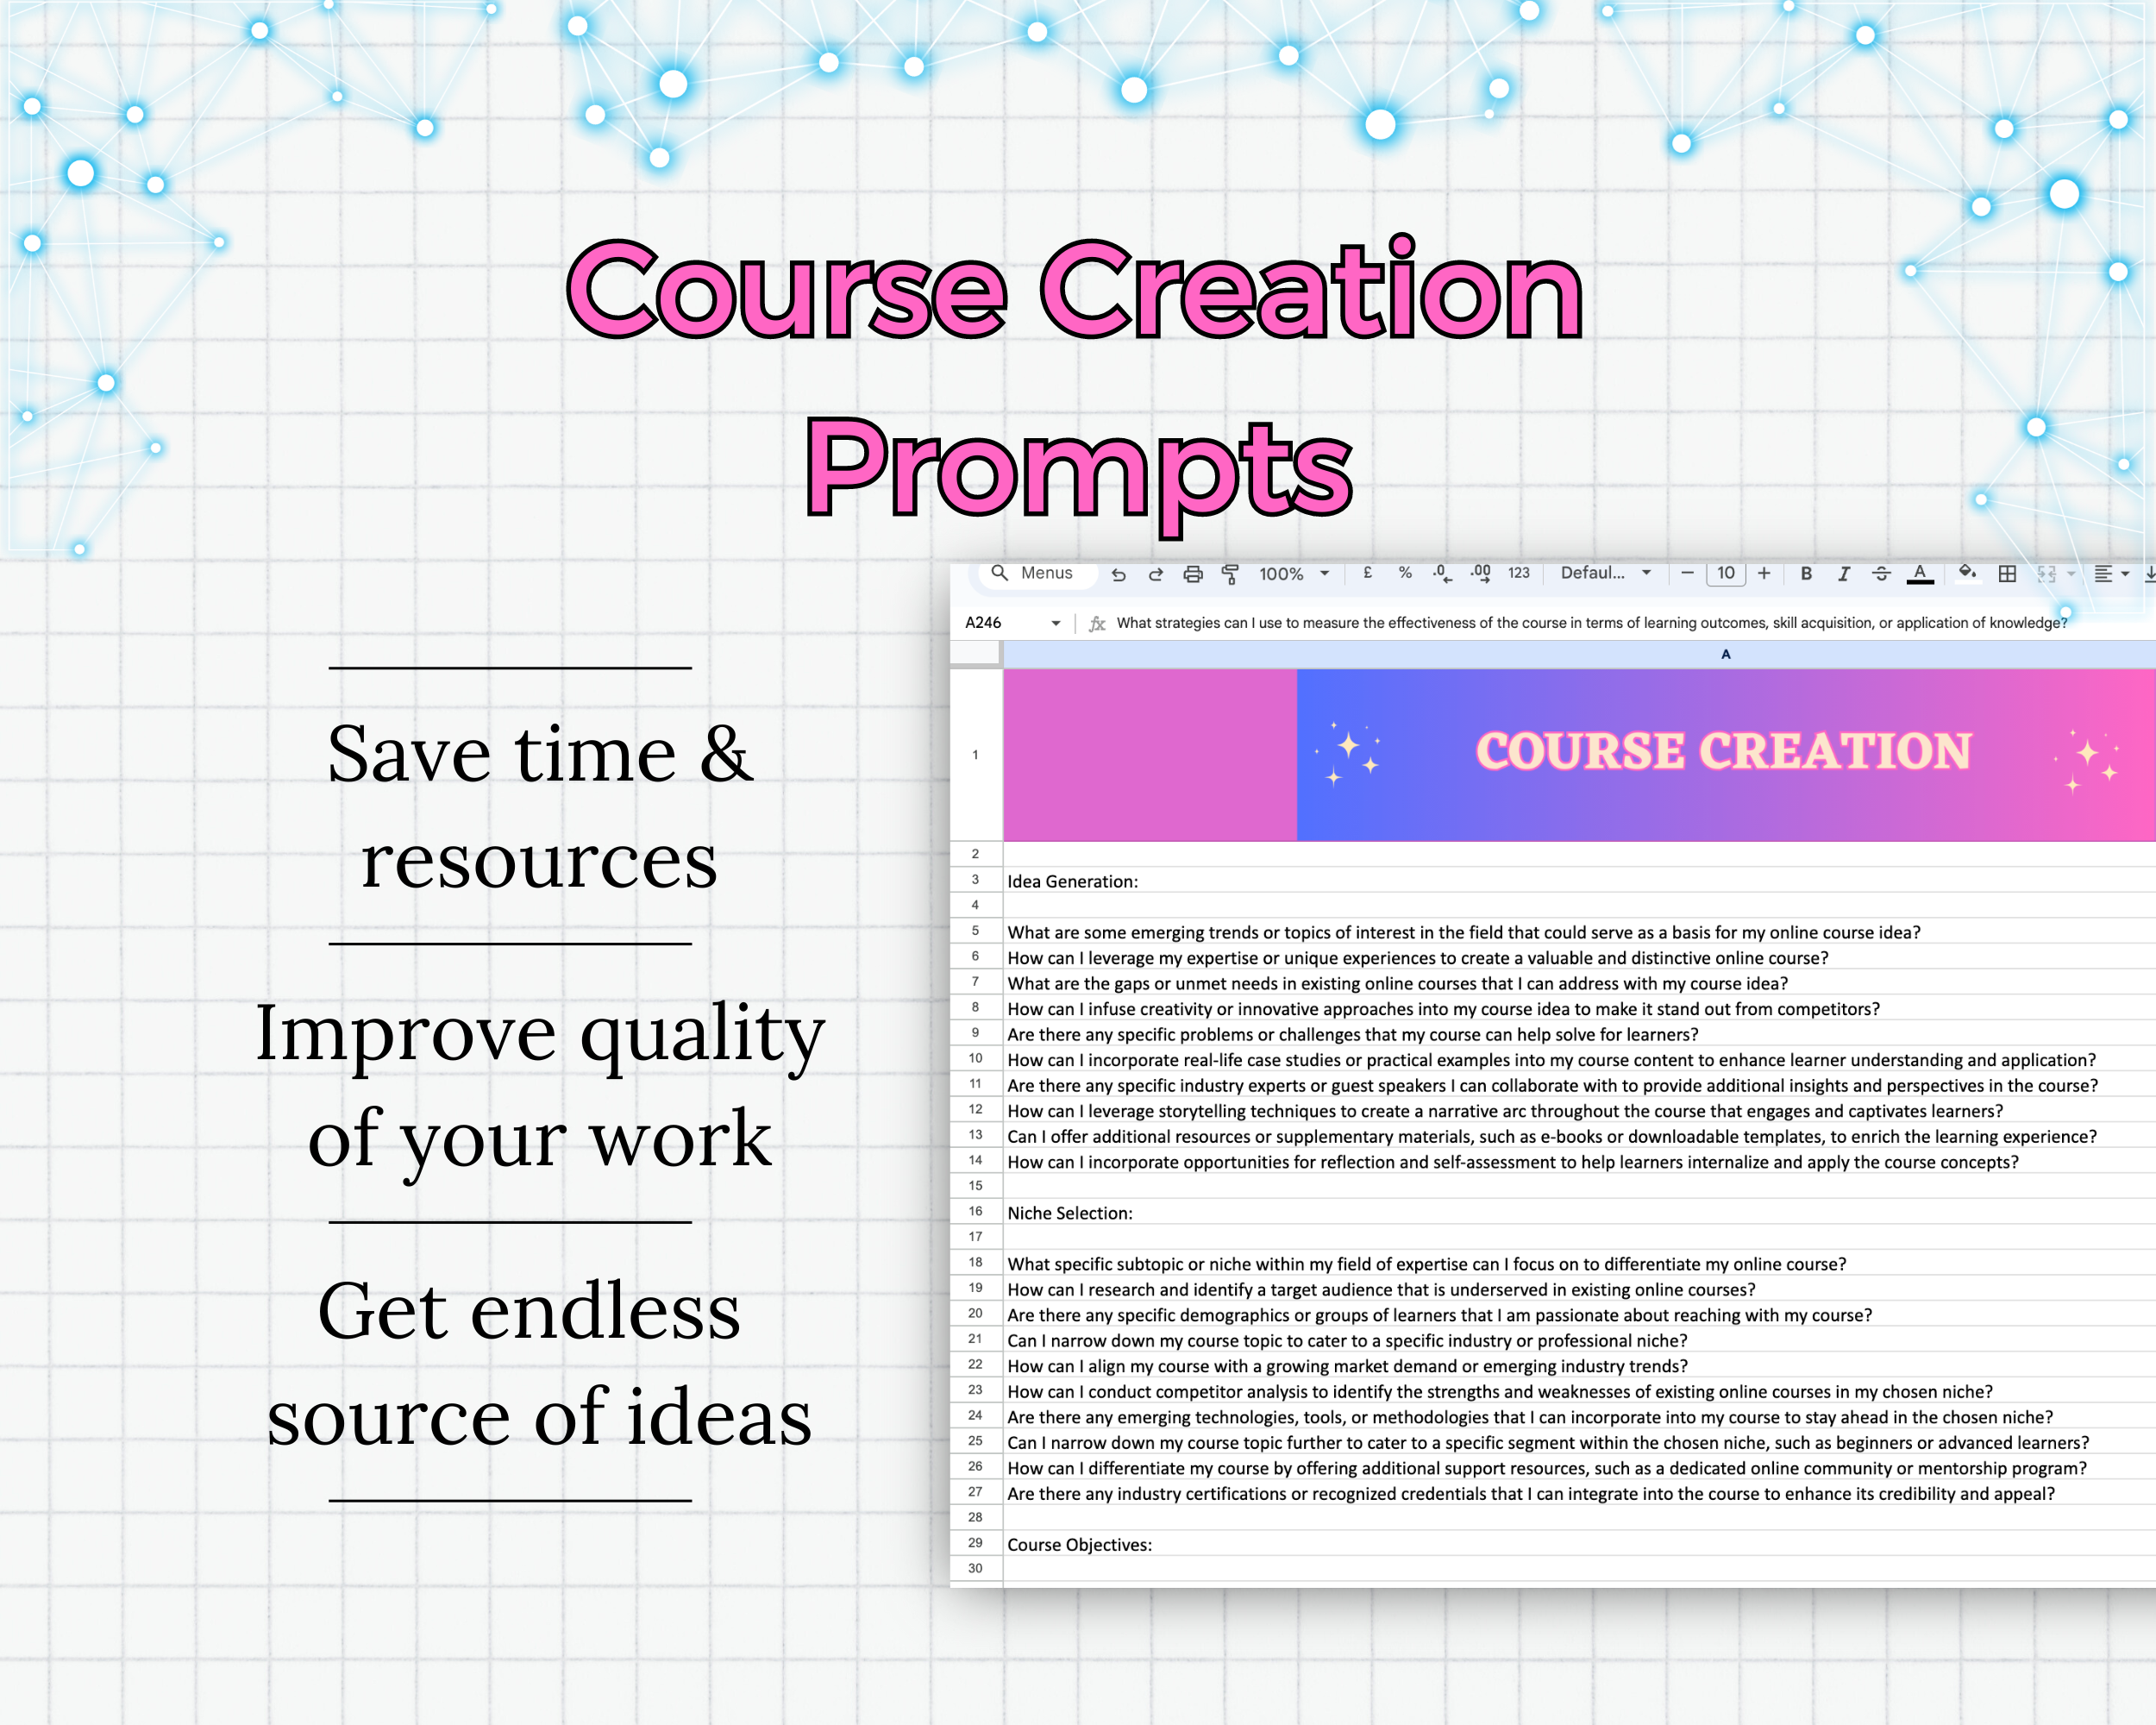 150+ Chat GPT Prompts for Course Creation